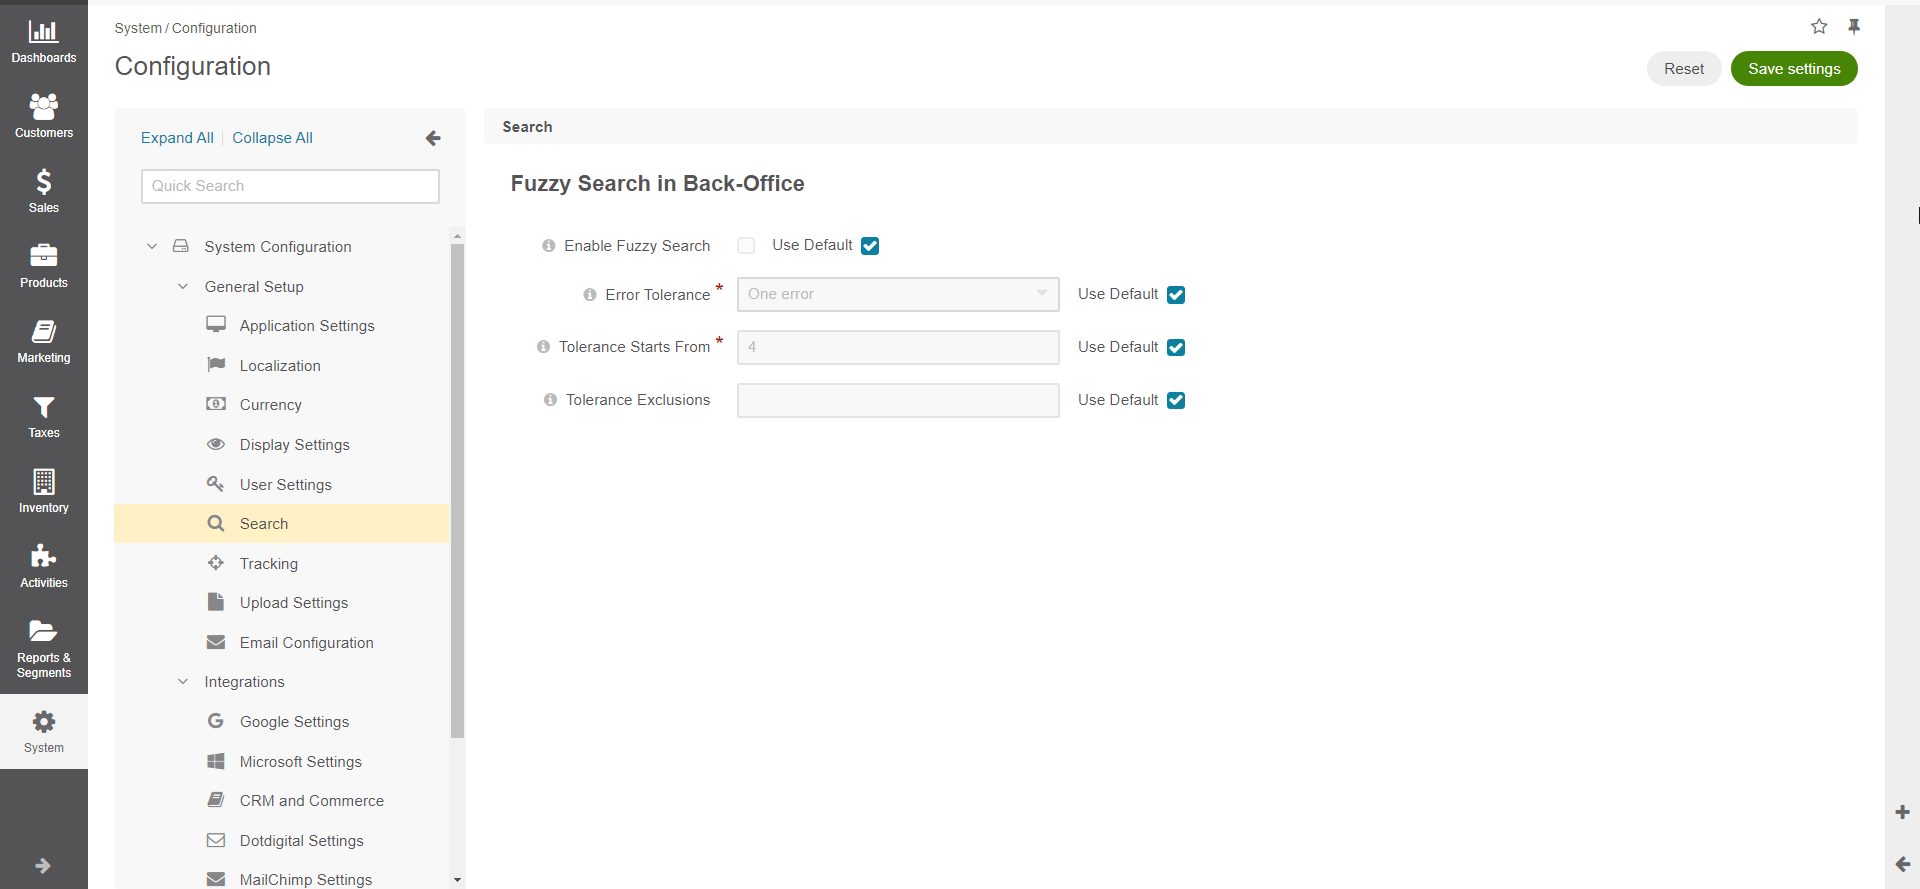 Back-office fuzzy search configuration options